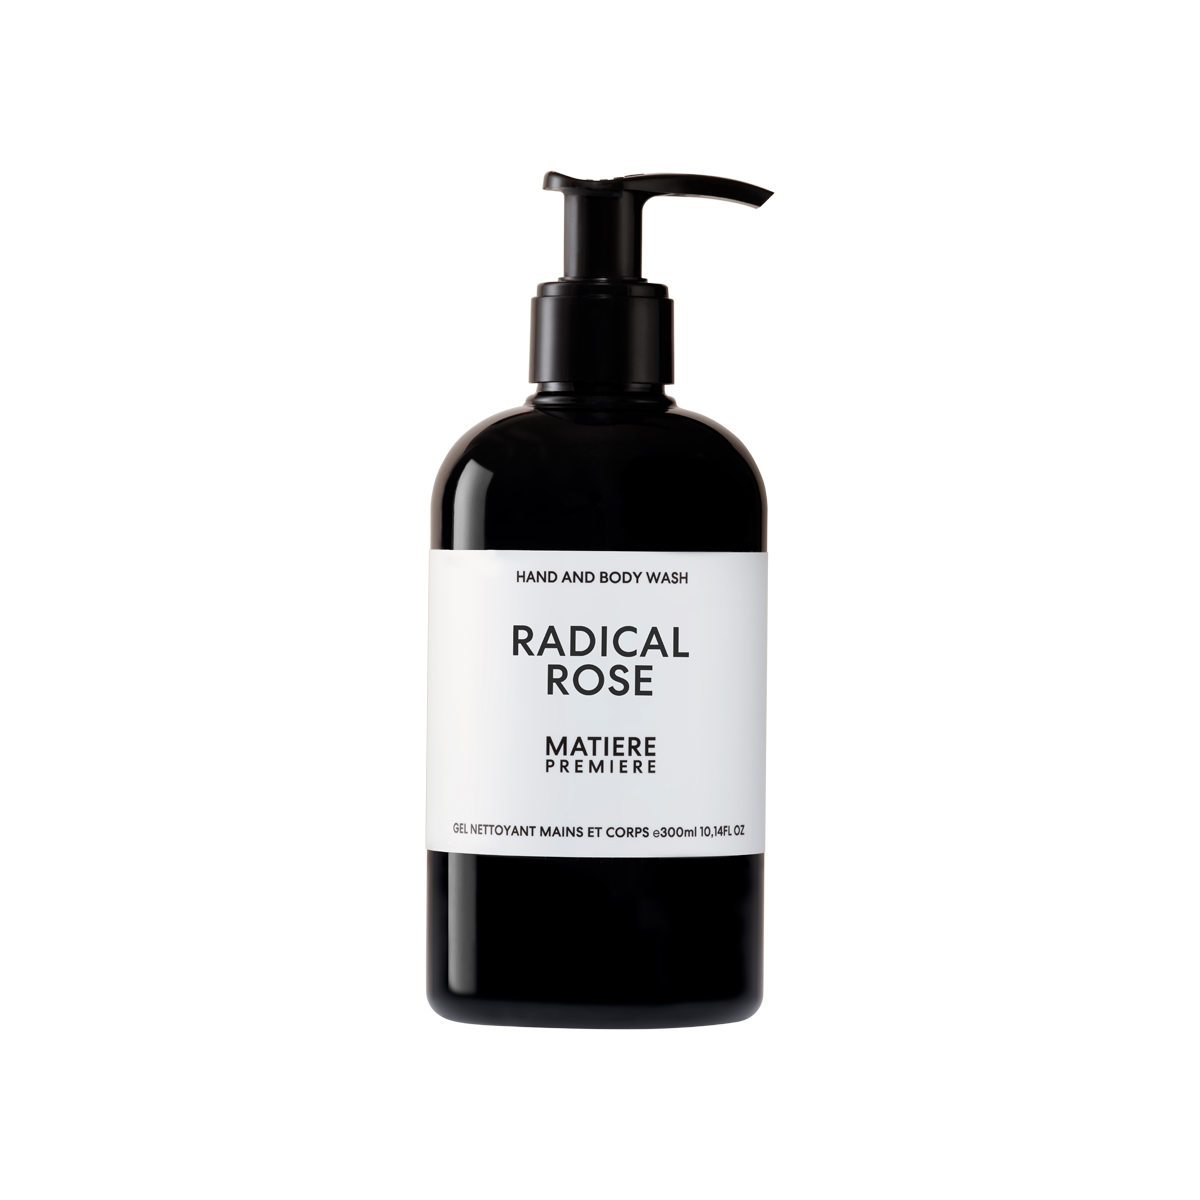 Matiere Premiere - Hand and body wash Radical Rose